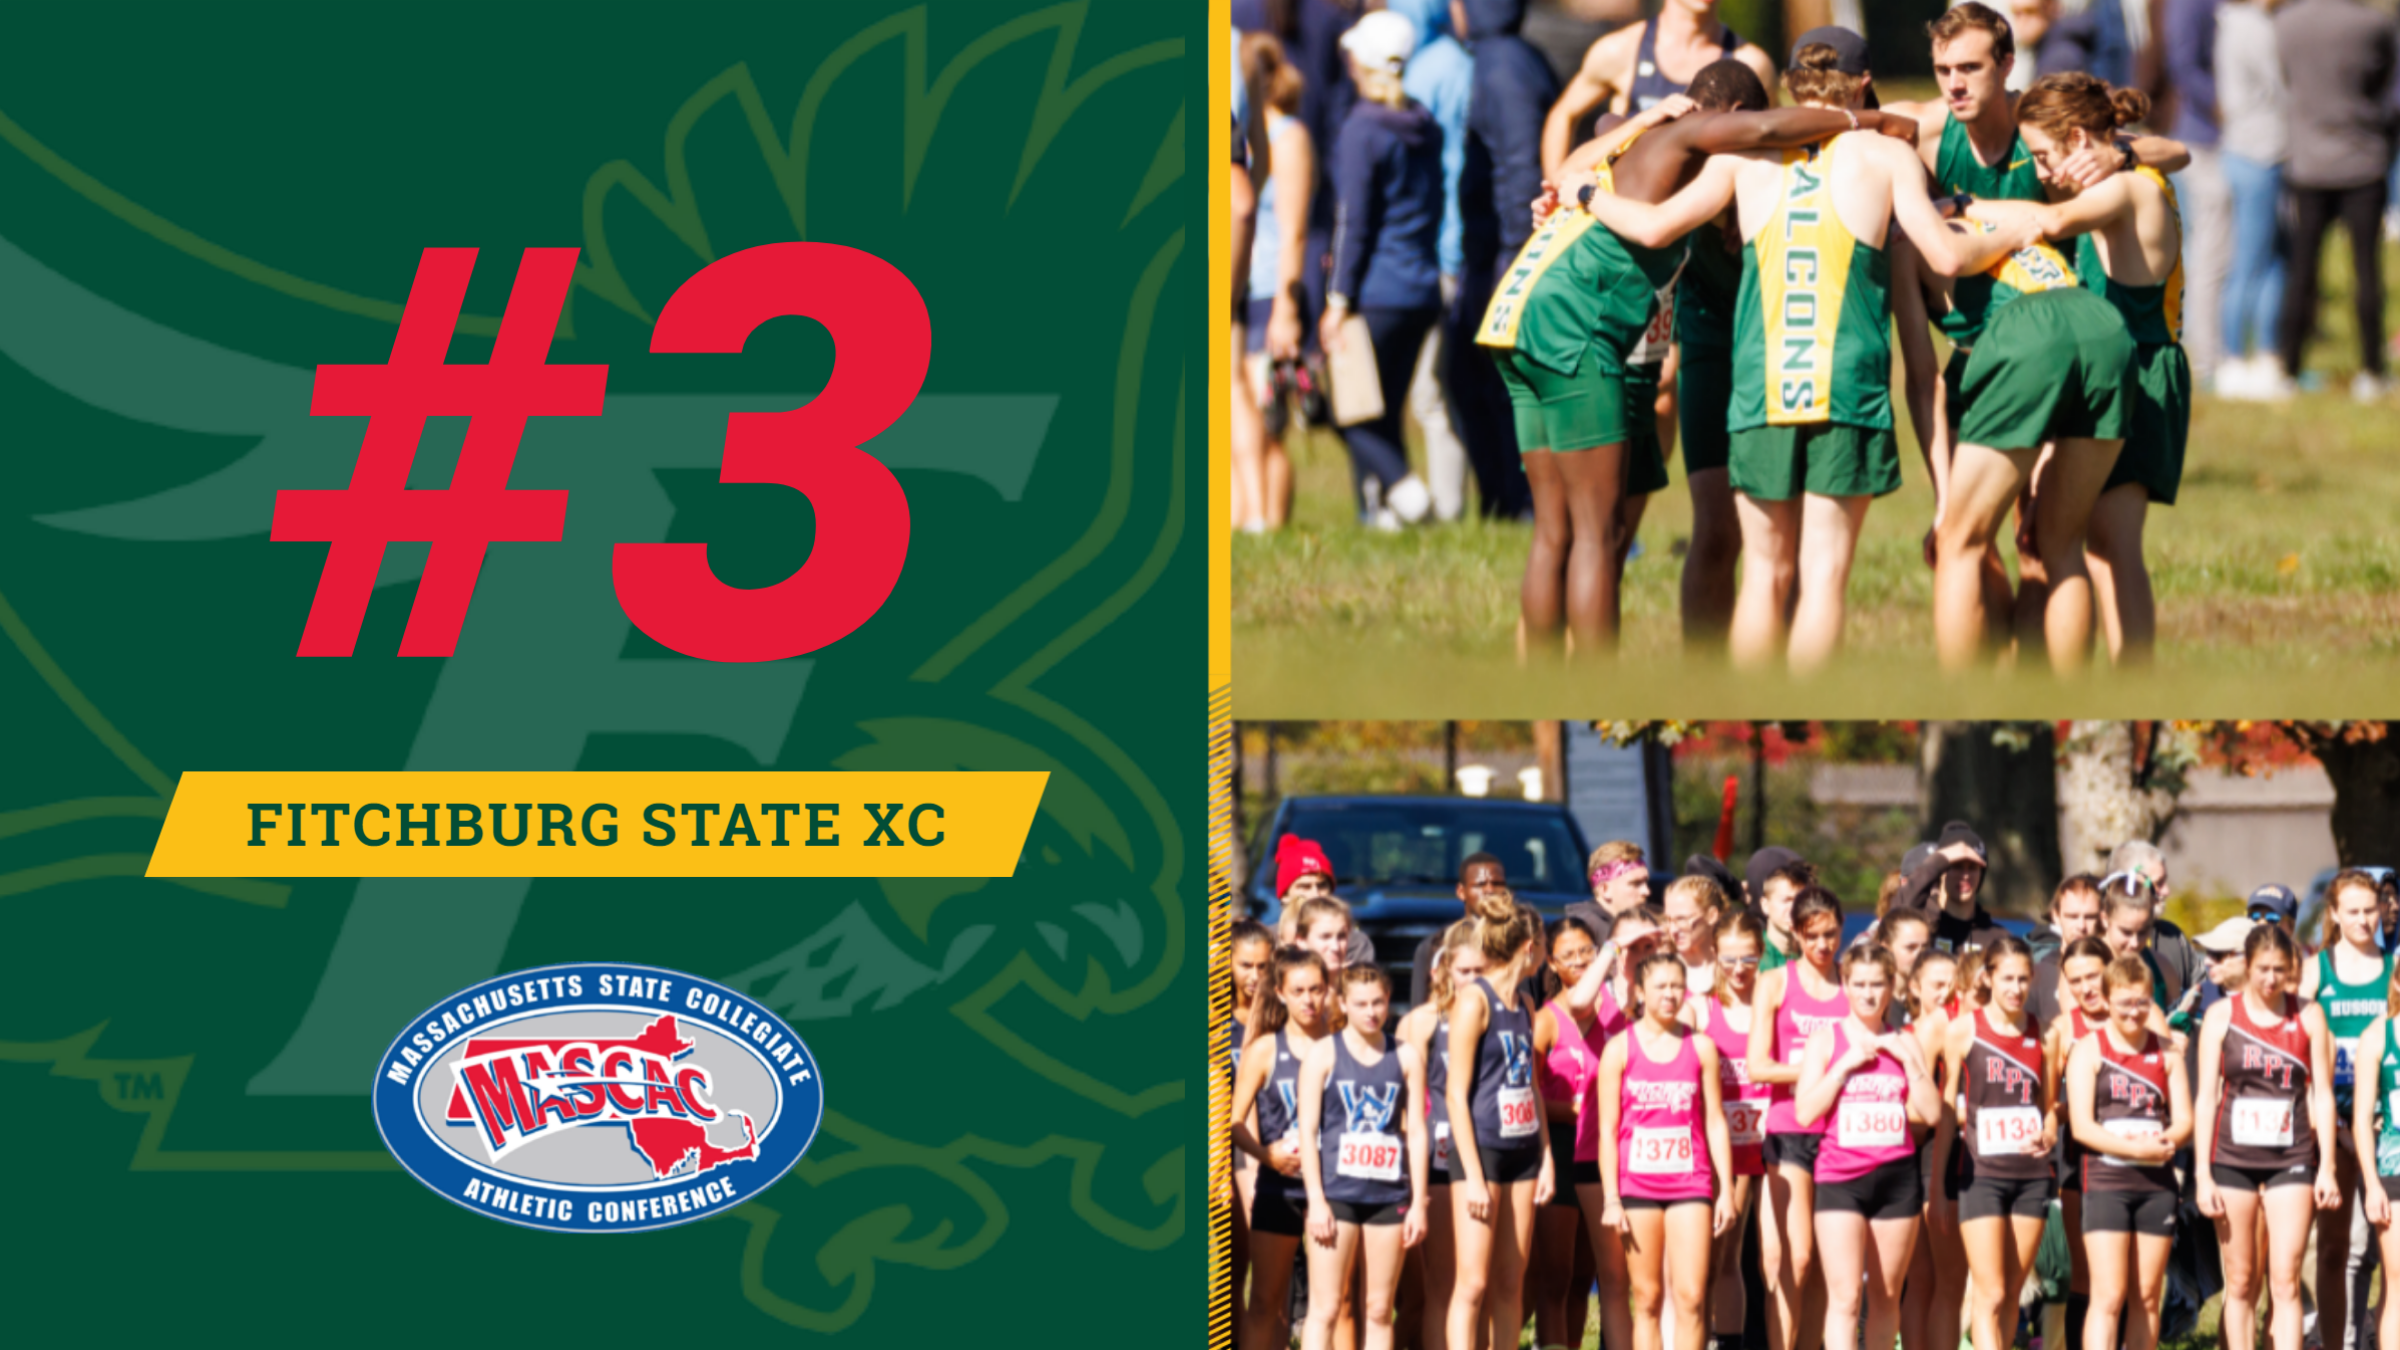 Both Men's and Women's XC Voted Third in MASCAC Preseason Poll